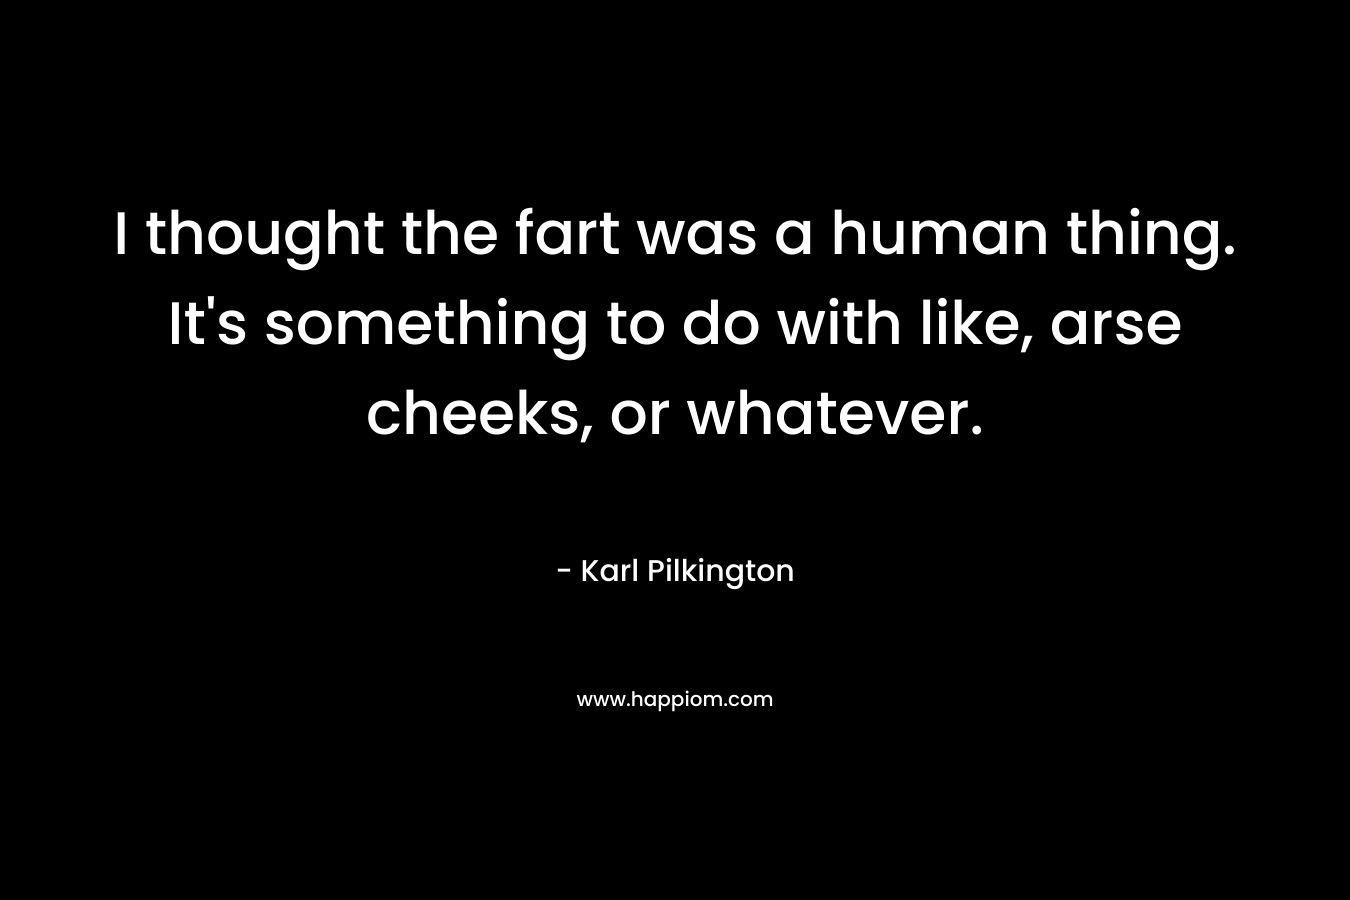 I thought the fart was a human thing. It's something to do with like, arse cheeks, or whatever.